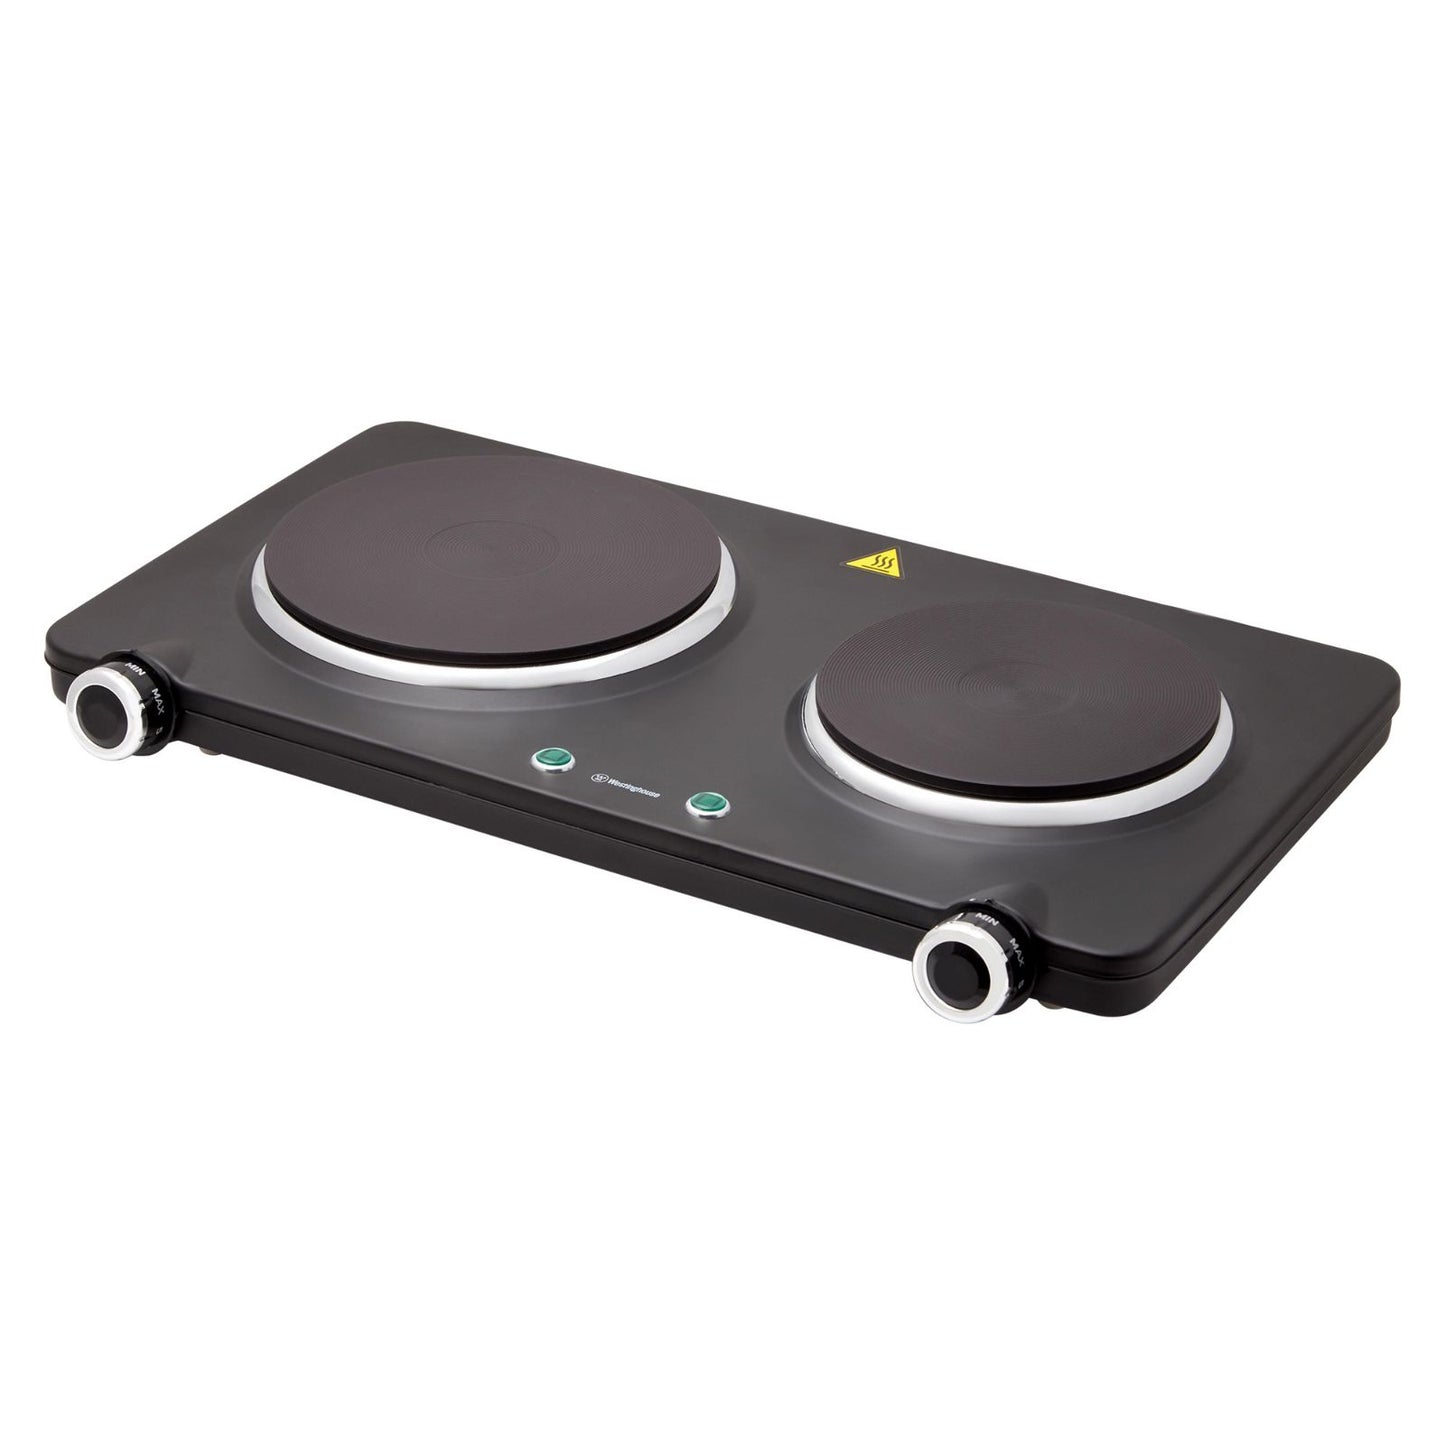 Westinghouse Dual Electric Hot Plate Easy Operation Cast Iron Plate-#product_category#- Distributed by:  under license